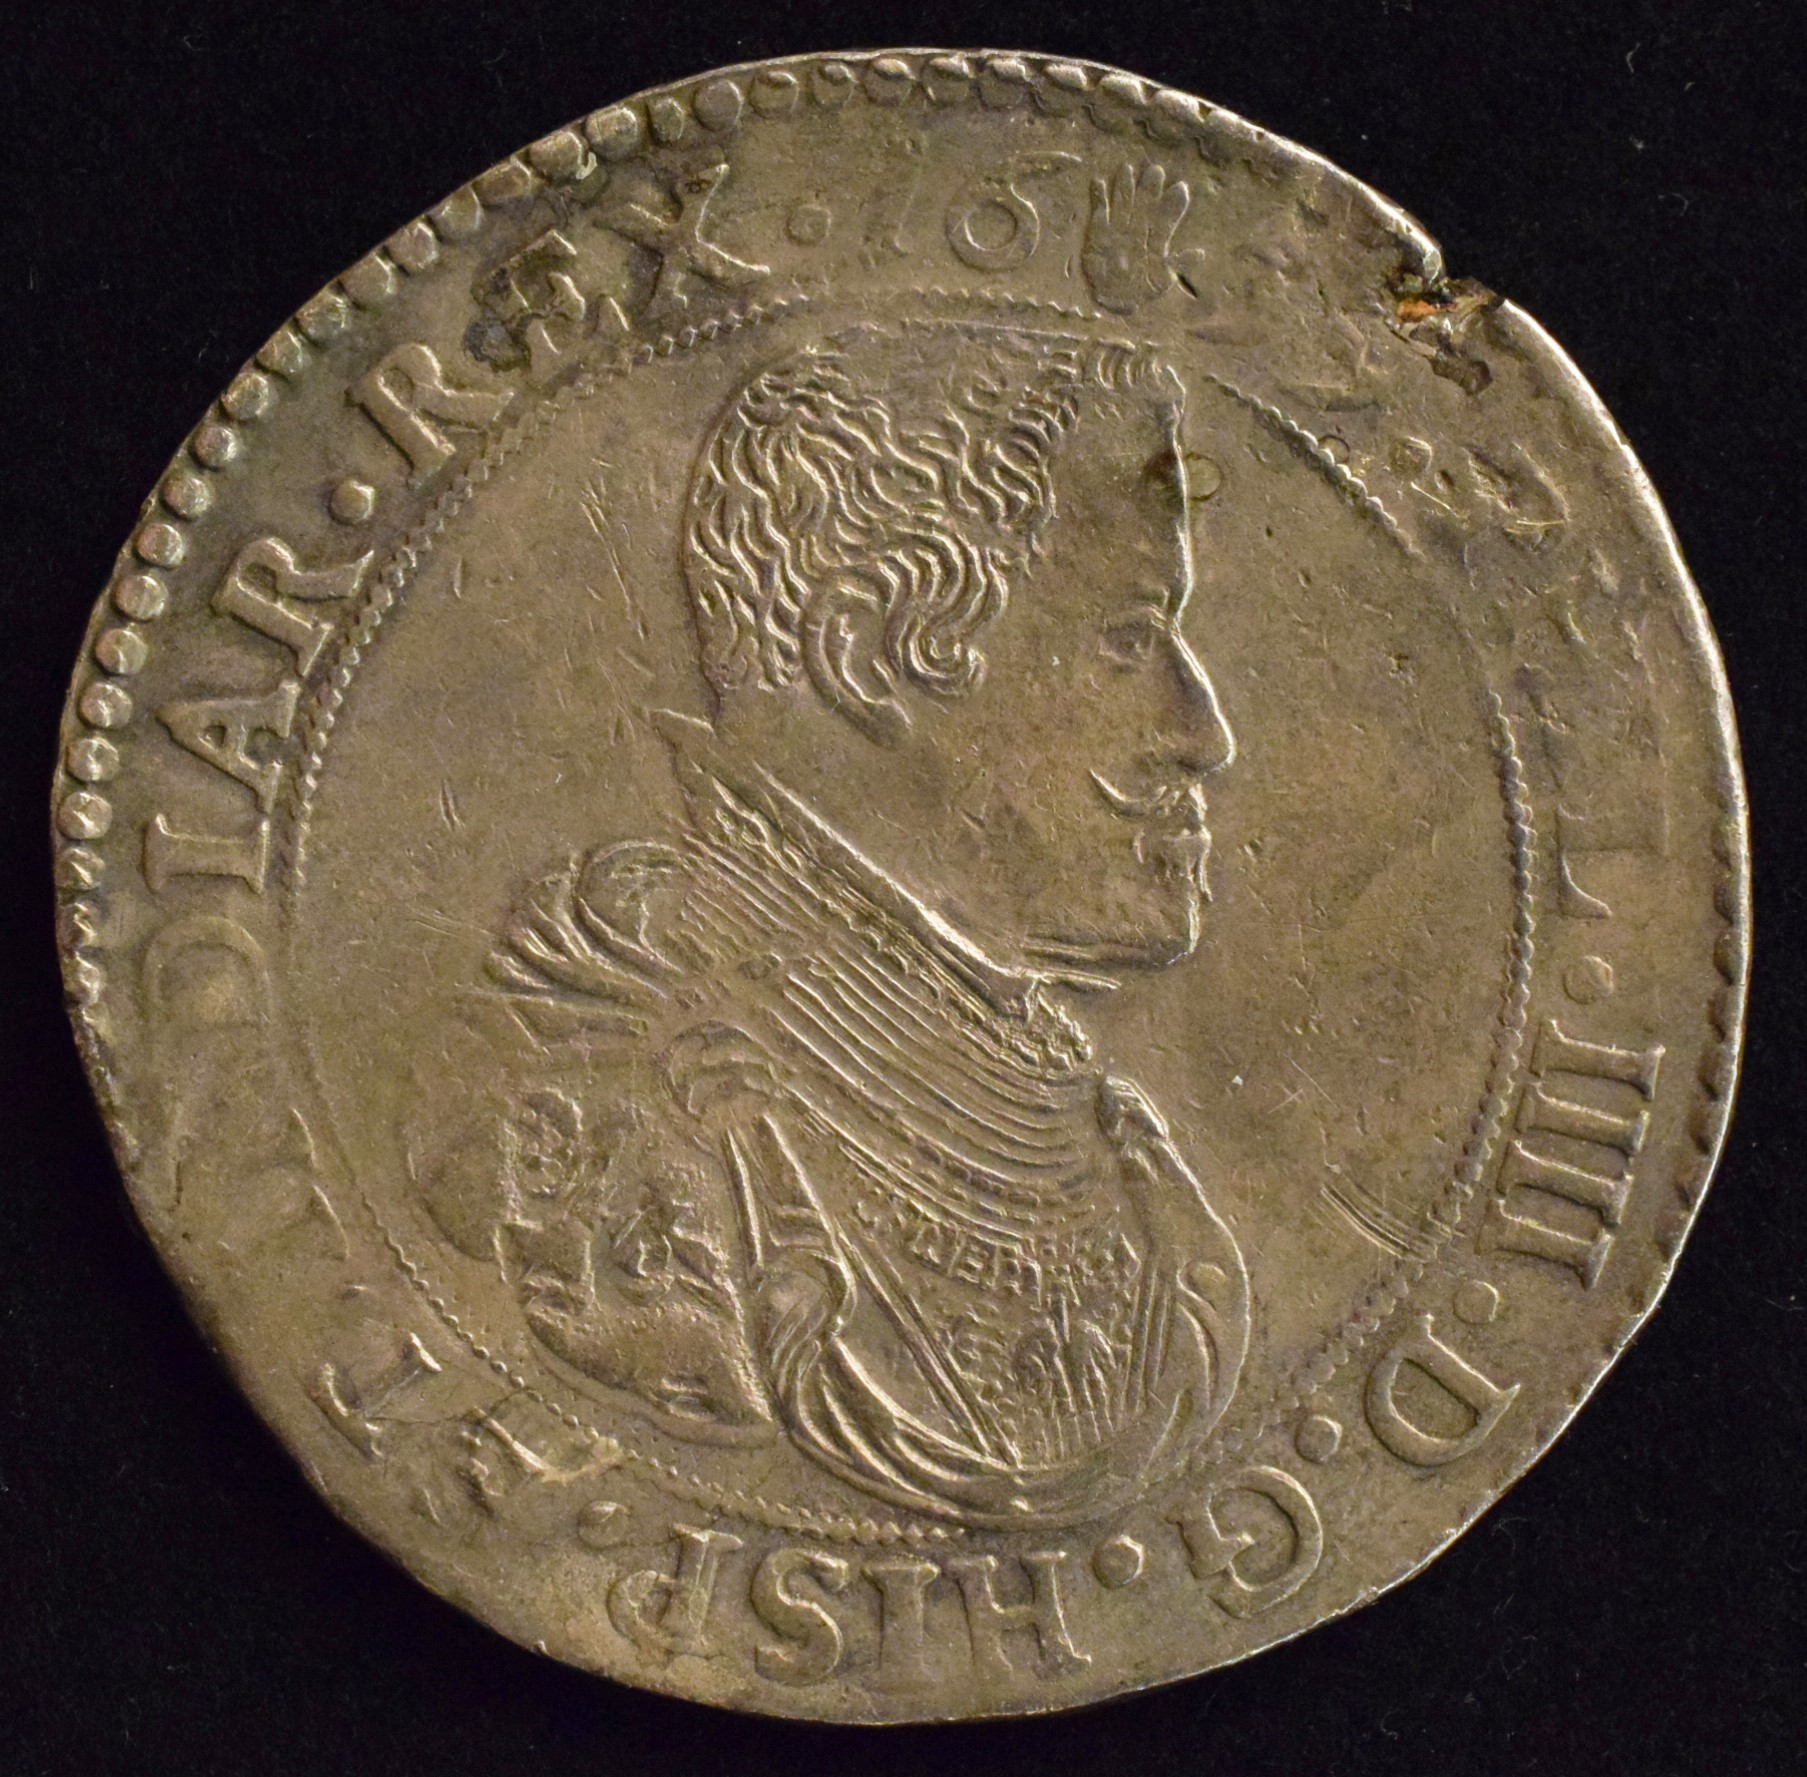 King Philip IV, Ducaton, 1639, Spanish Netherlands - Brabant, Antwerp mint, Draped and armoured bust